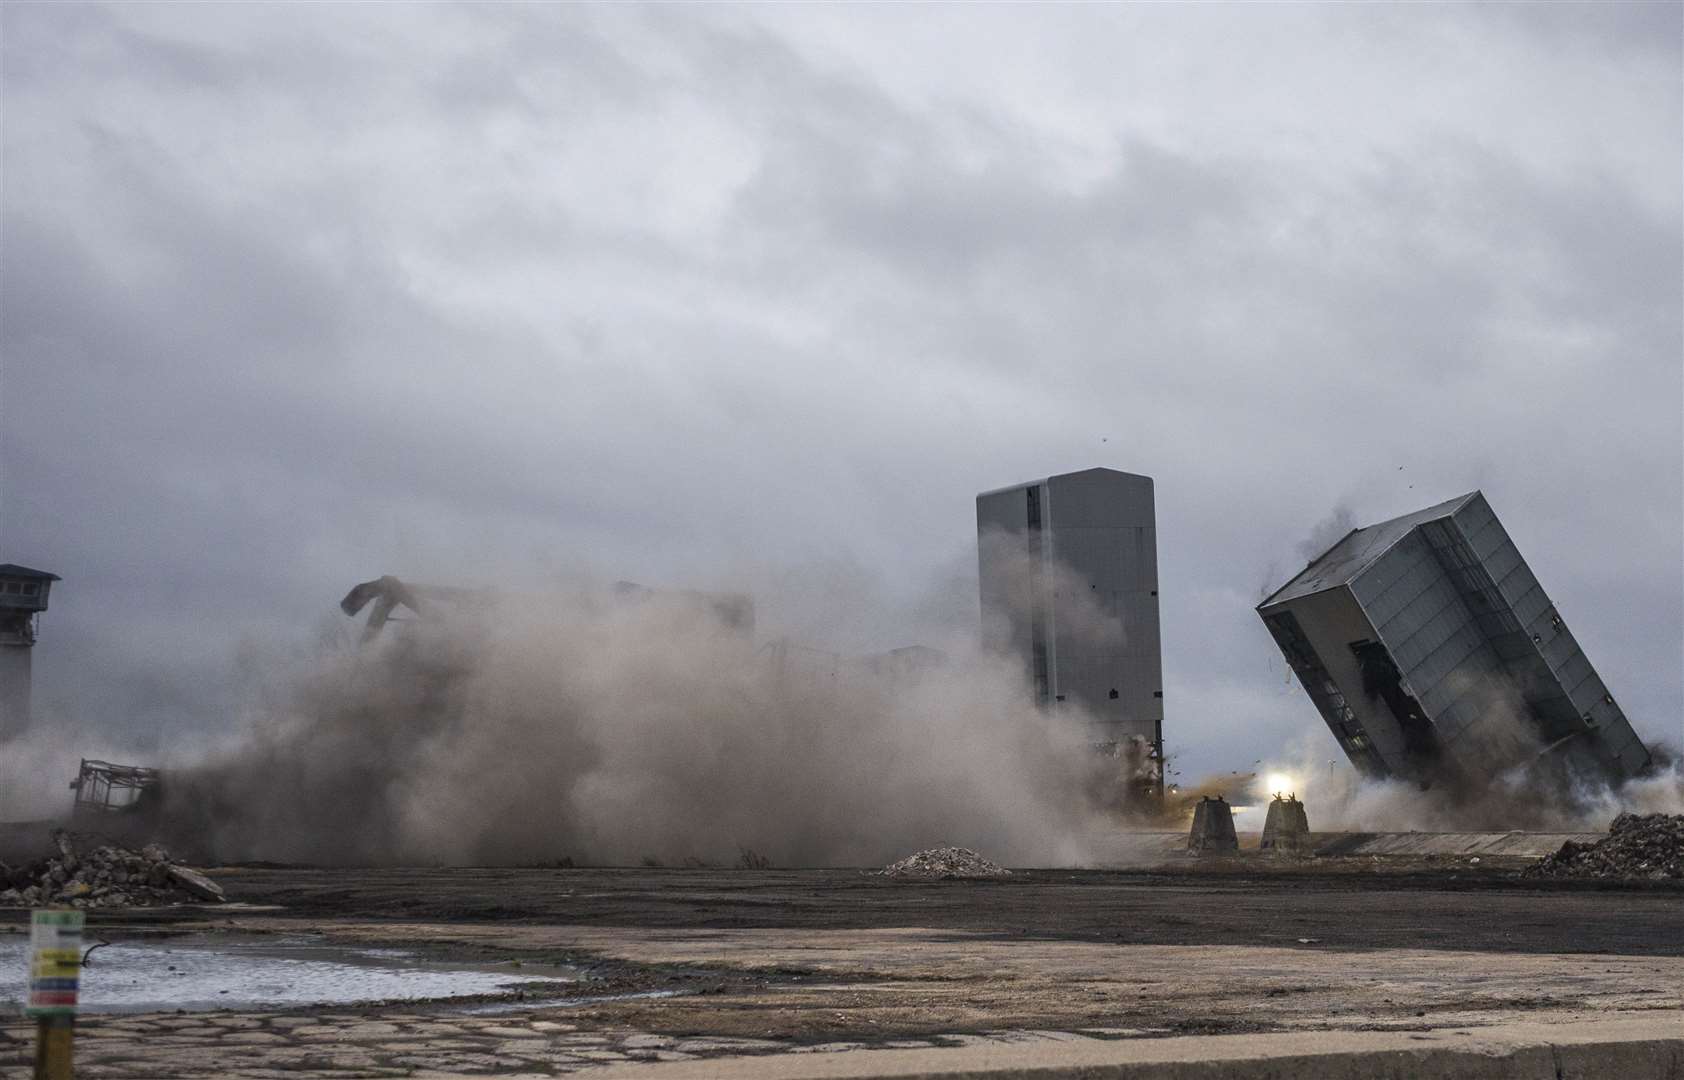 KIngsnorth Power Station was demolished in 2013, and it was found some 4,000 tonnes of asbestos materials were present. Picture: Victoria Blake/ EON